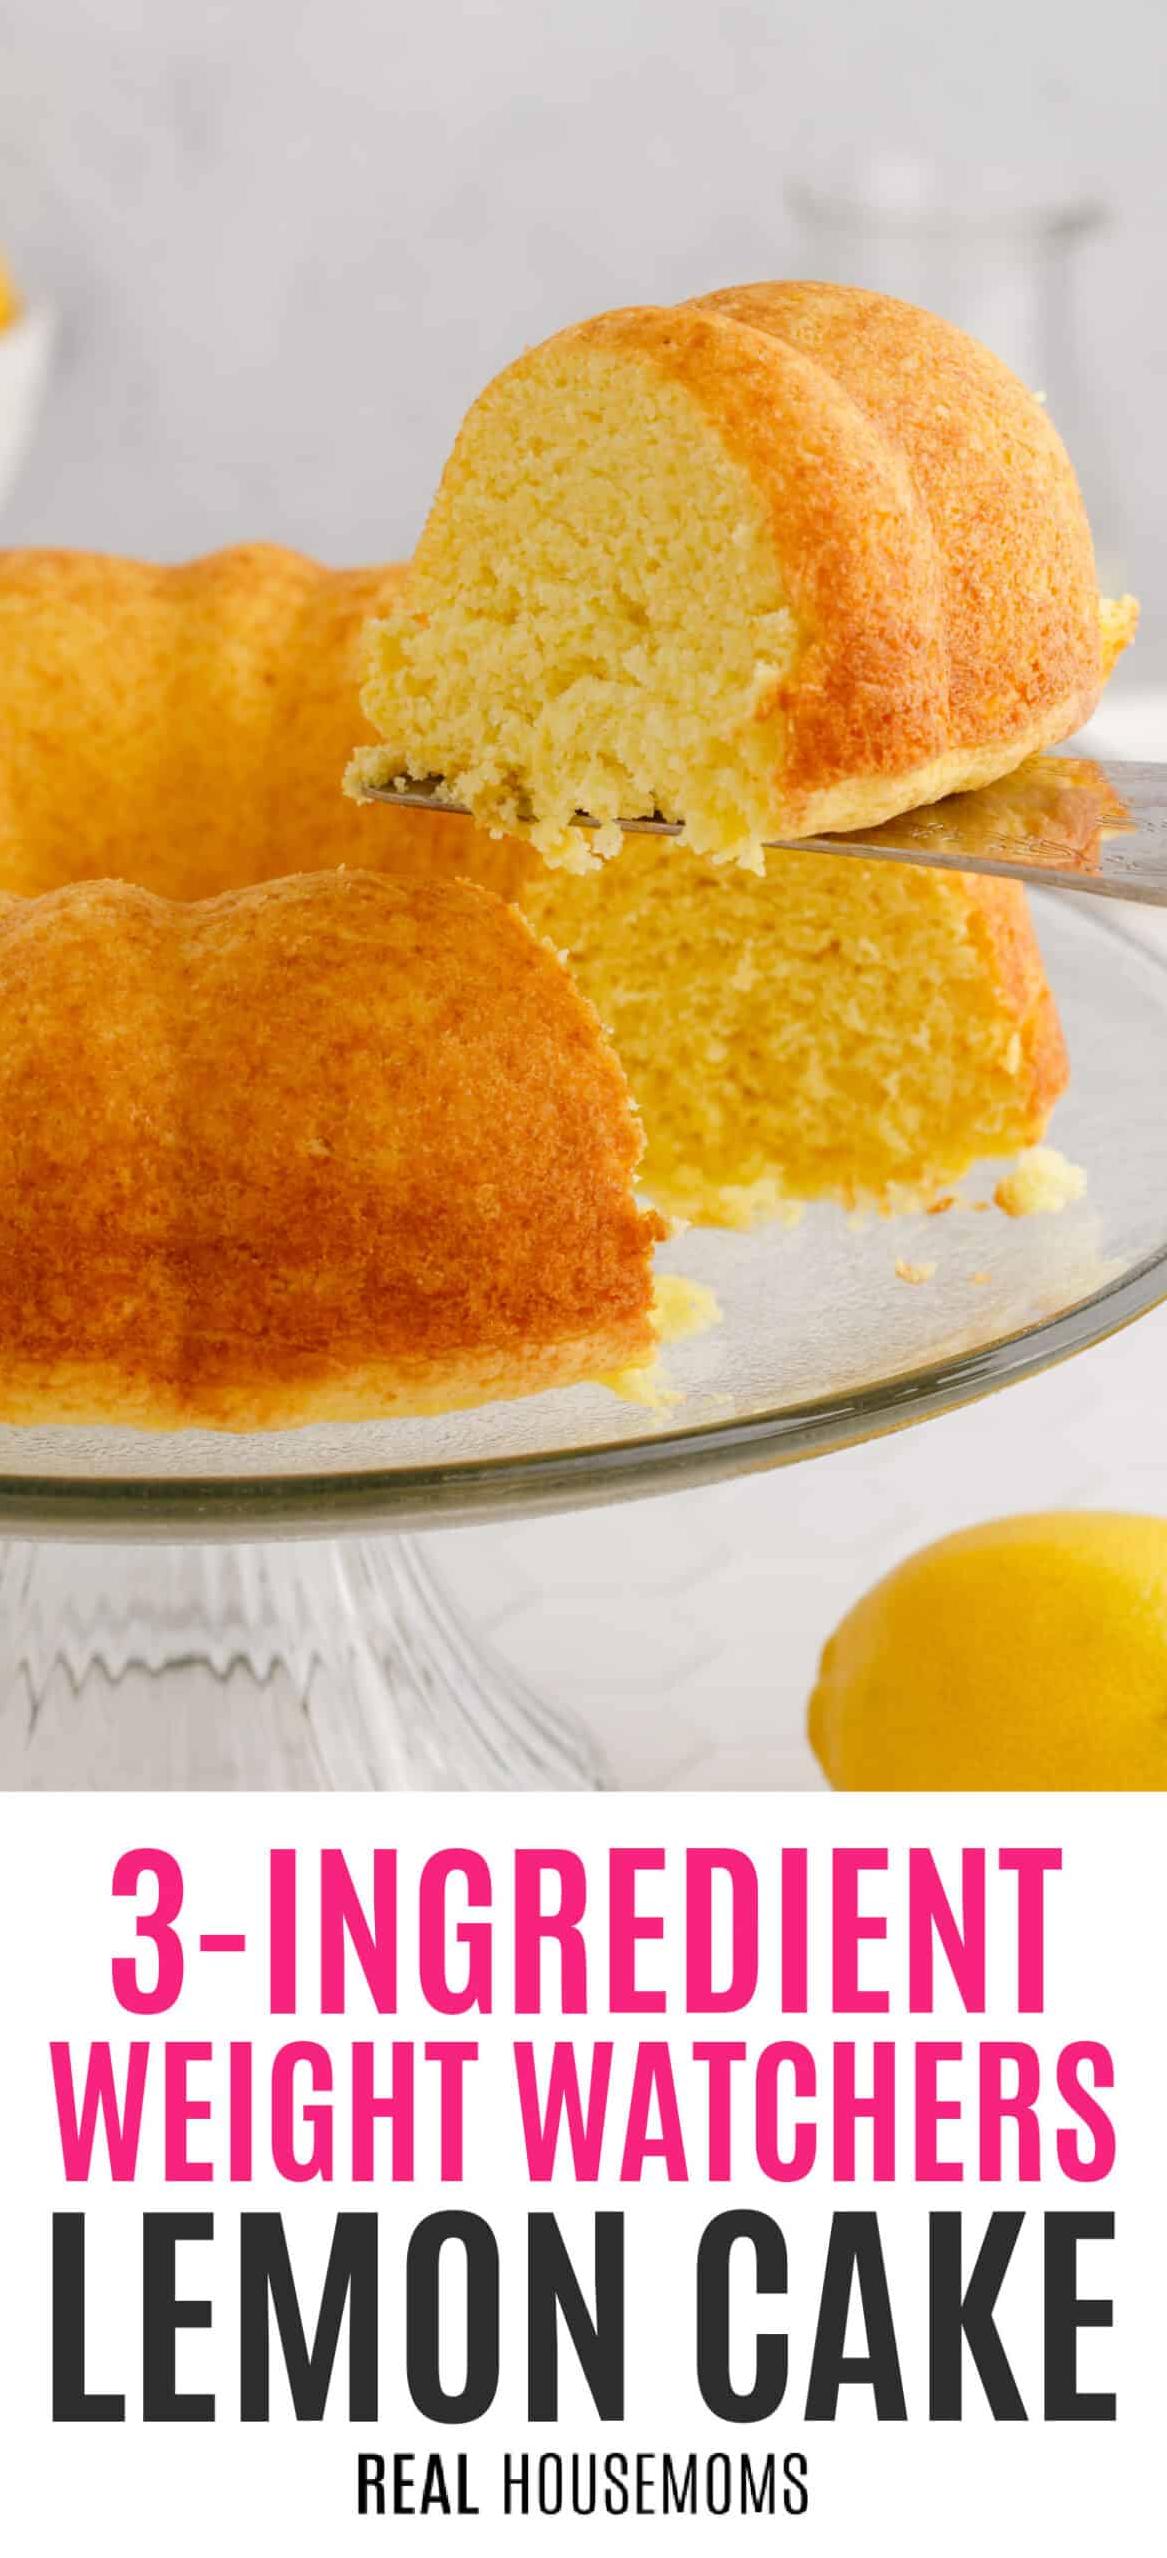  The moist crumb of this cake is irresistible, and the tangy citrus flavor will light up your taste buds.